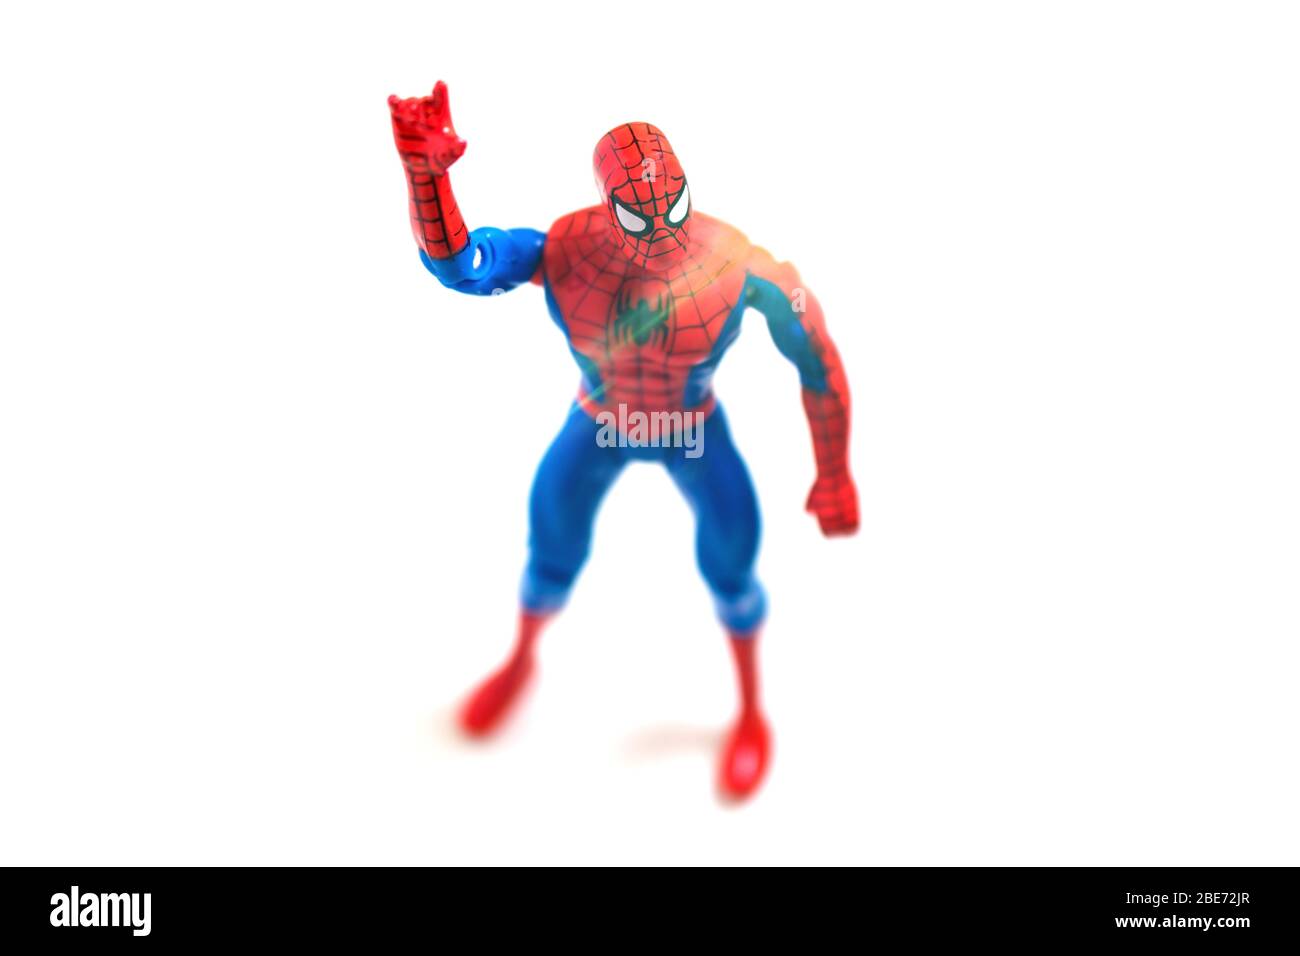 Spider Man model in a white background. Photo with copy space. Stock Photo